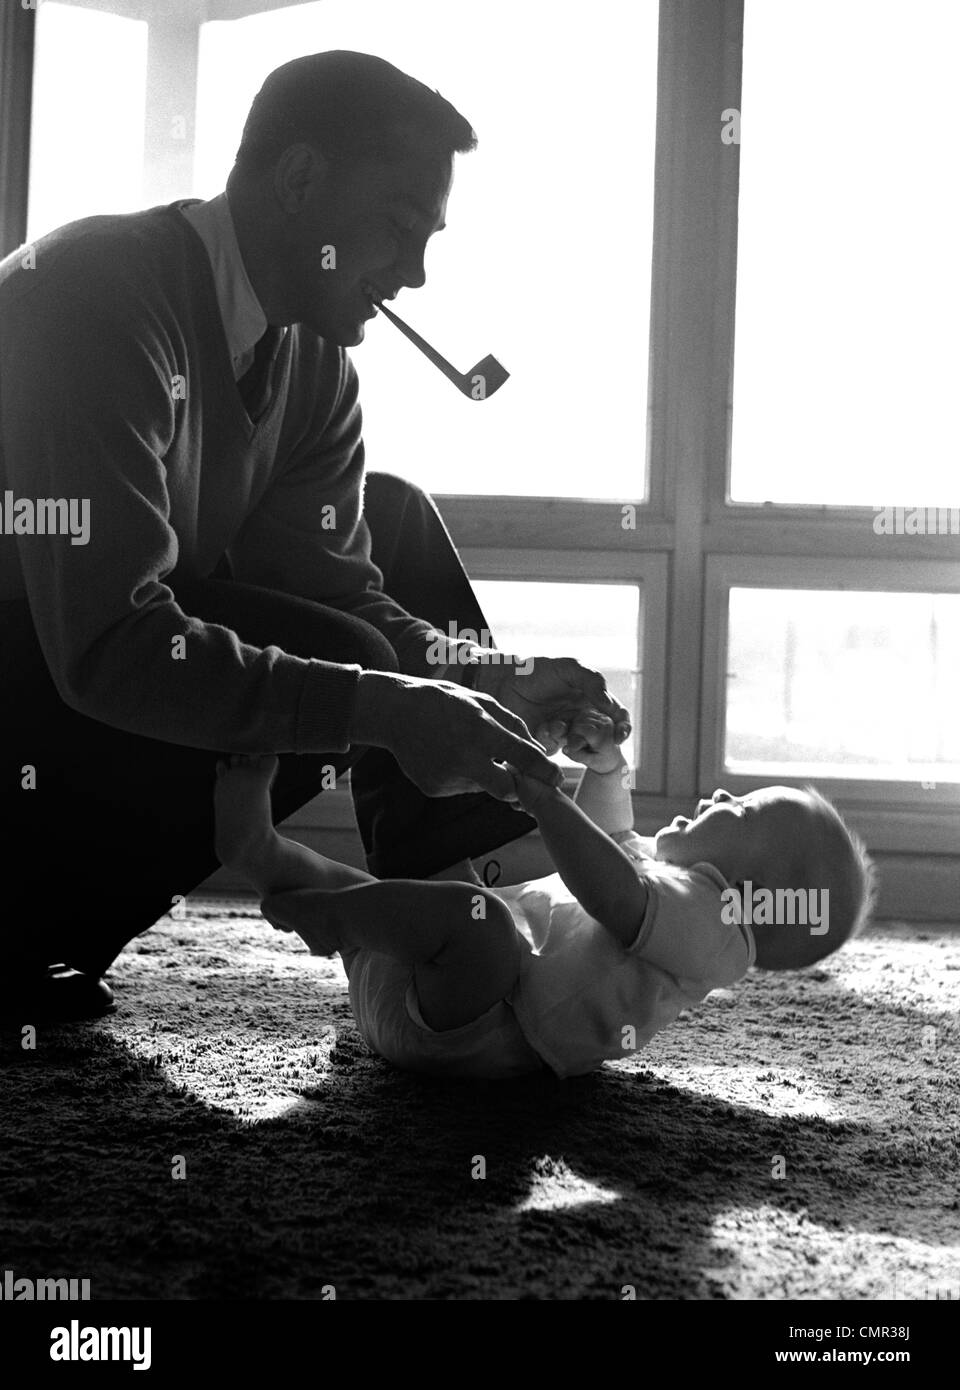 1950s FATHER PIPE IN MOUTH KNEELING DOWN TO PLAY WITH BABY LAYING ON FLOOR SUNLIGHT COMING IN THROUGH WINDOWS Stock Photo